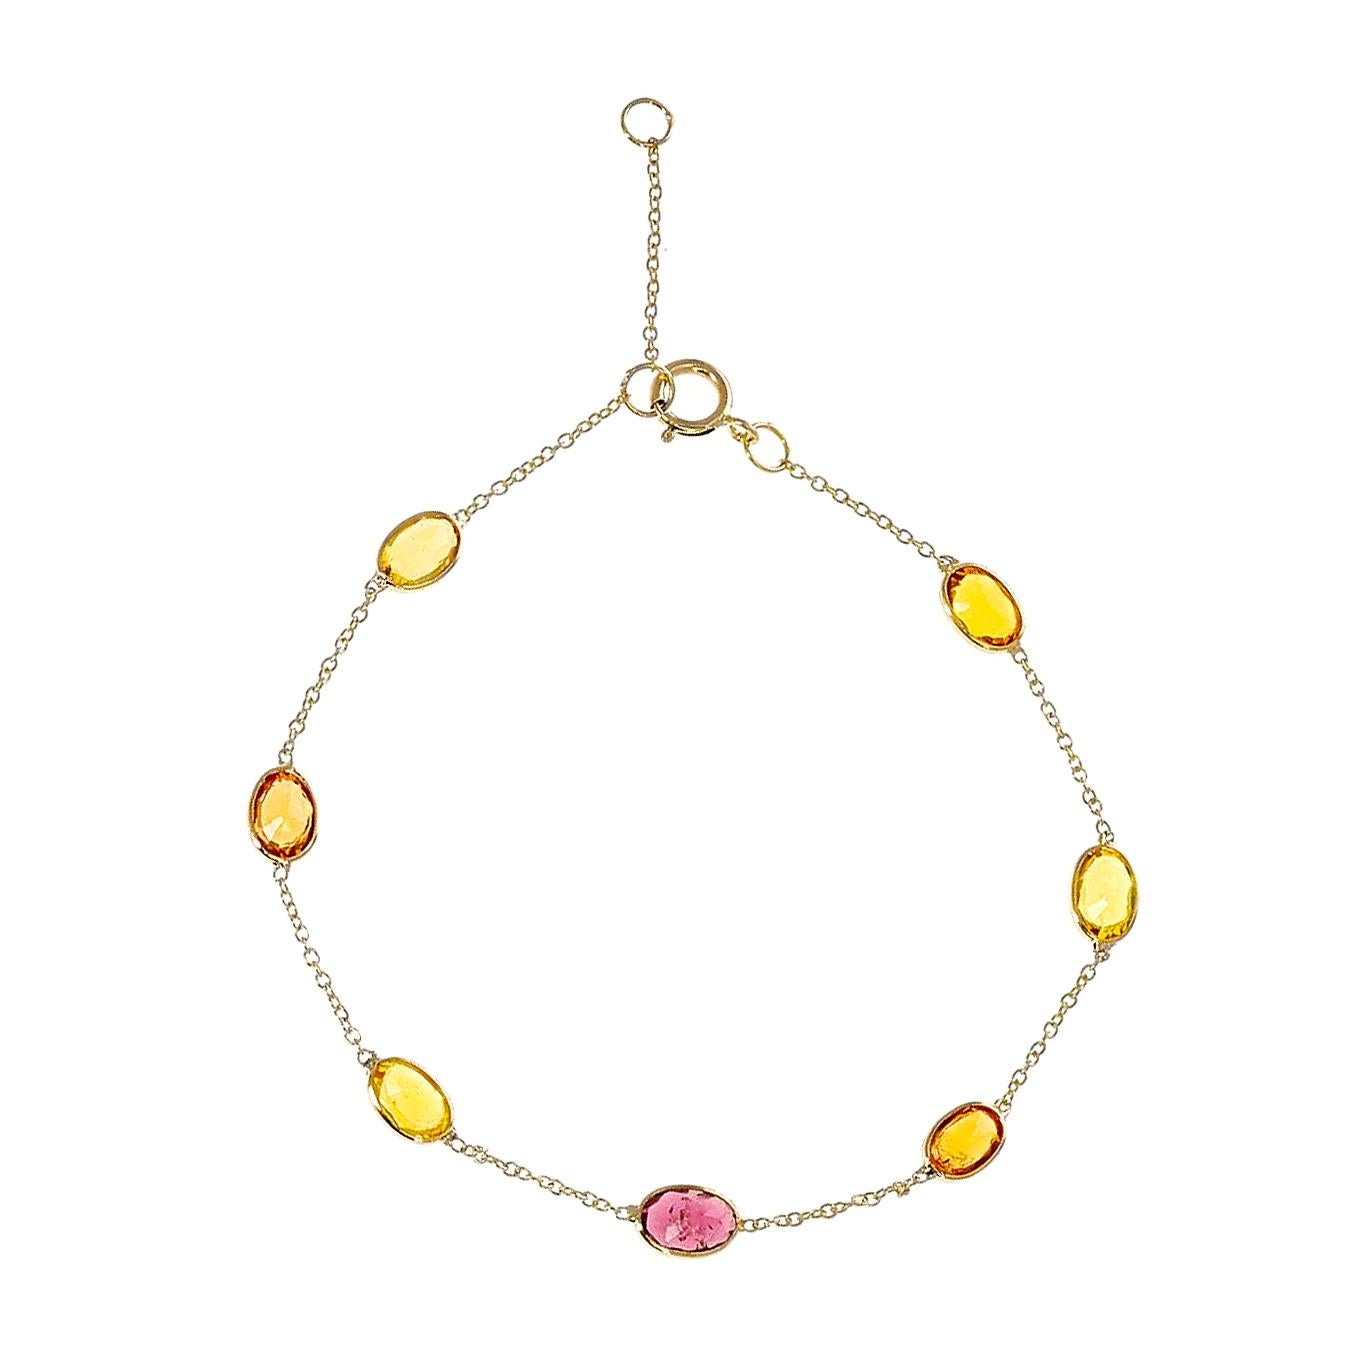 A 4 x 6 Oval Genuine Multi-Sapphire 18k Yellow Gold Adjustable Bracelet. The length of the bracelet can either be 6.75